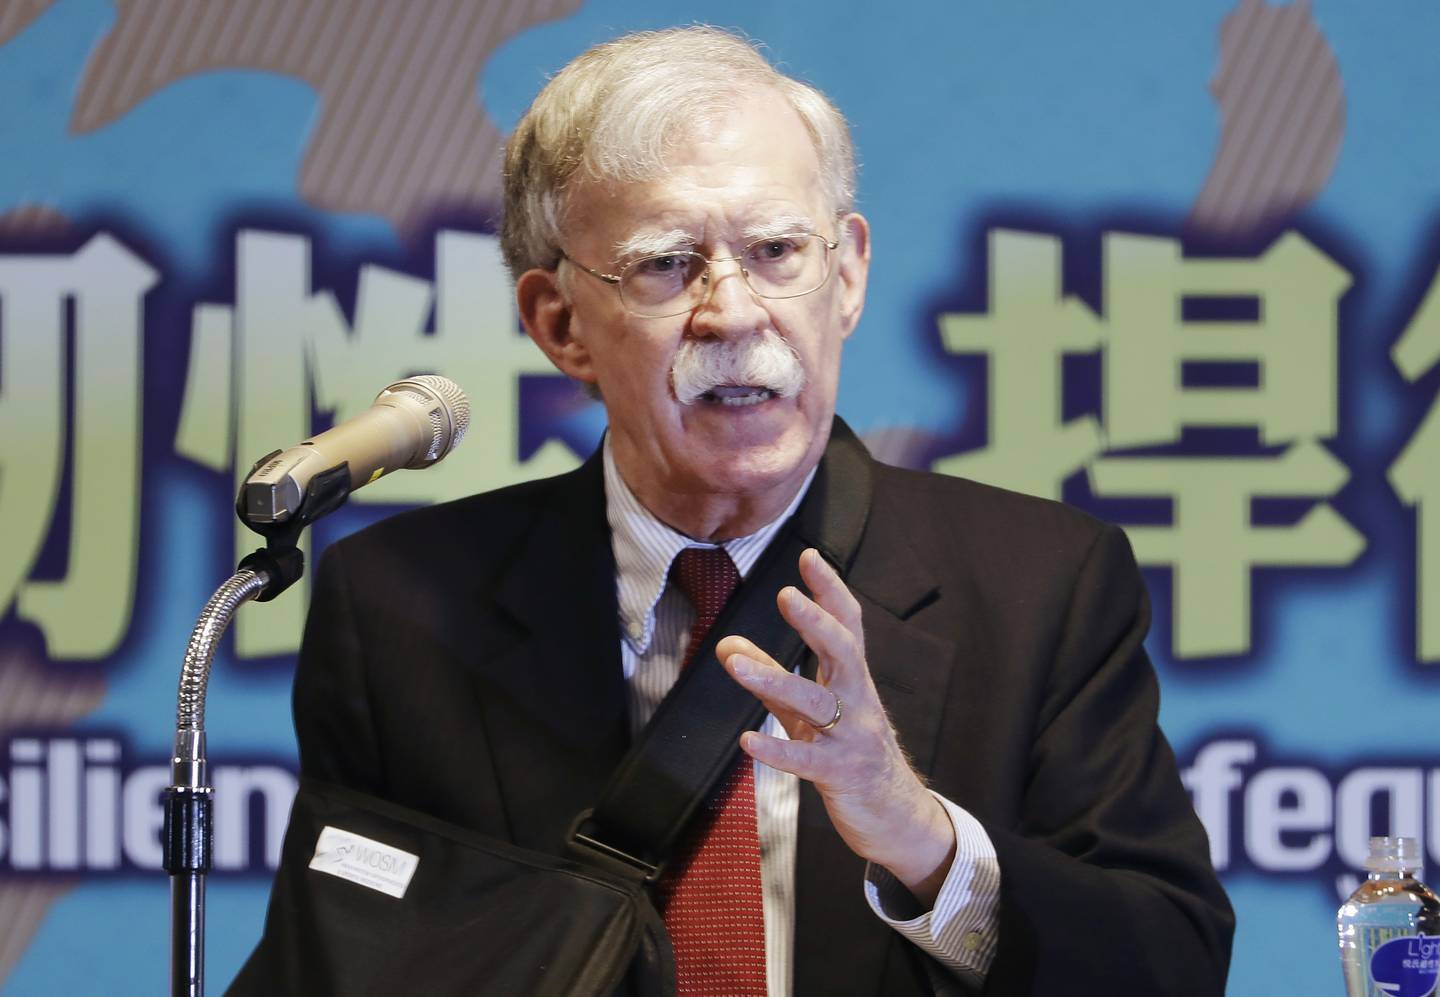 FILE - Former U.S. national security advisor John Bolton speaks at the Global Taiwan National Affair Symposium XII in Taipei, Taiwan, April 29, 2023. As Donald Trump seeks the presidency a third time, he's being shadowed by a chorus of people who served in his administration turned sharp critics. Bolton has described Trump as "unfit to be president." (AP Photo/Chiang Ying-ying, File)